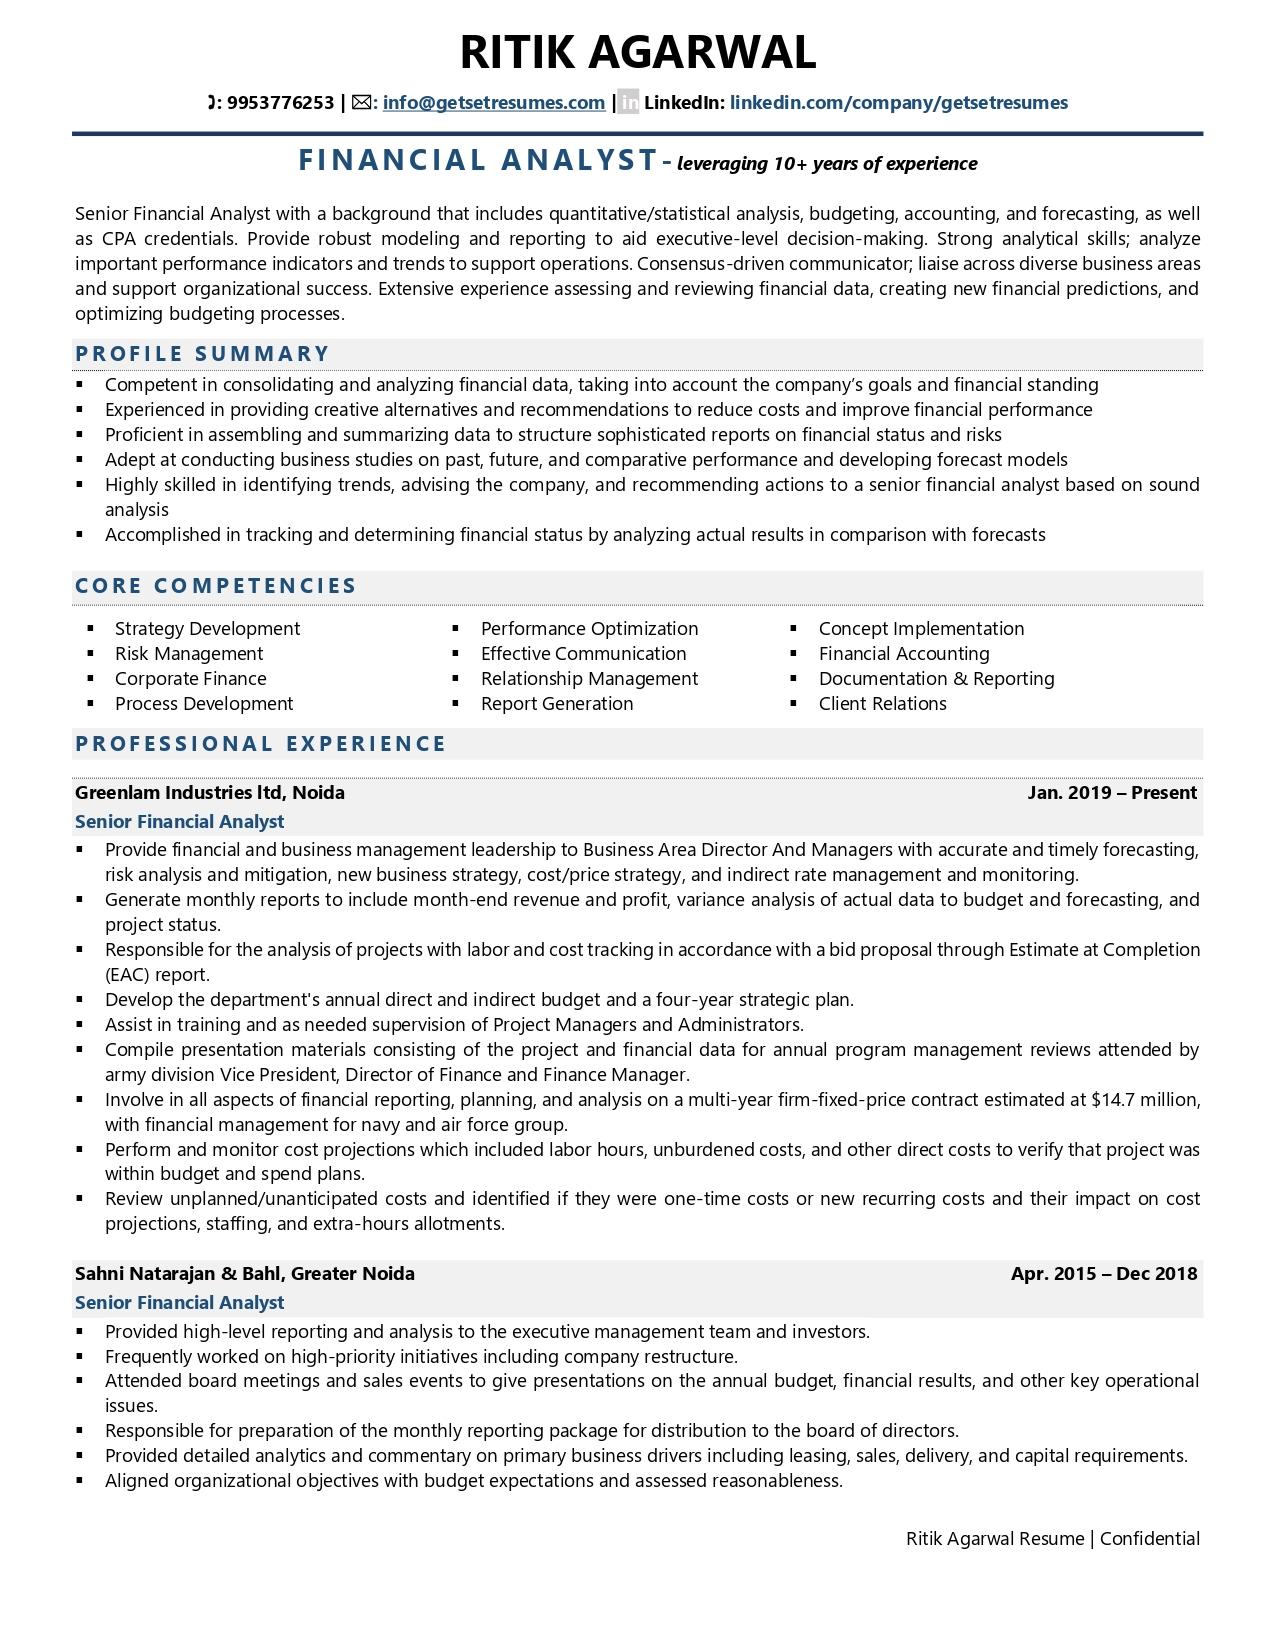 Financial Analyst Resume Examples & Template (with job winning tips)